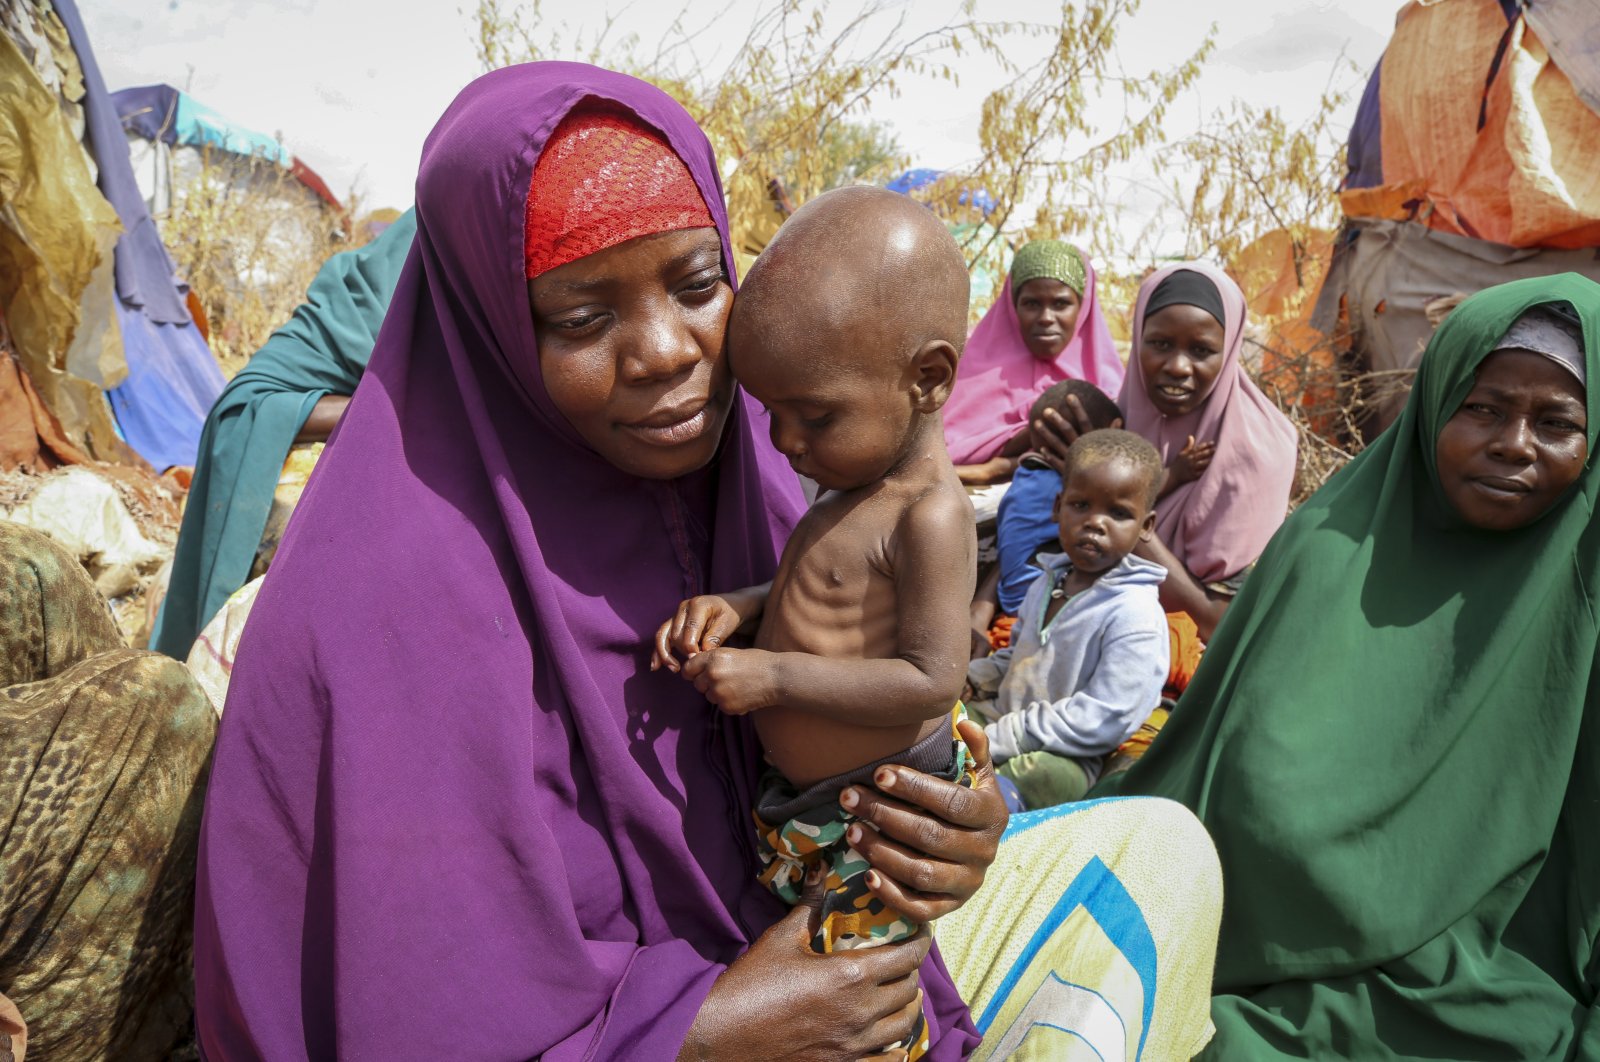 Nunay Mohamed, 25, who fled the drought-stricken Lower Shabelle area, holds her 1-year-old malnourished child at a makeshift camp for the displaced on the outskirts of Mogadishu, Somalia, June 30, 2022. (AP Photo)